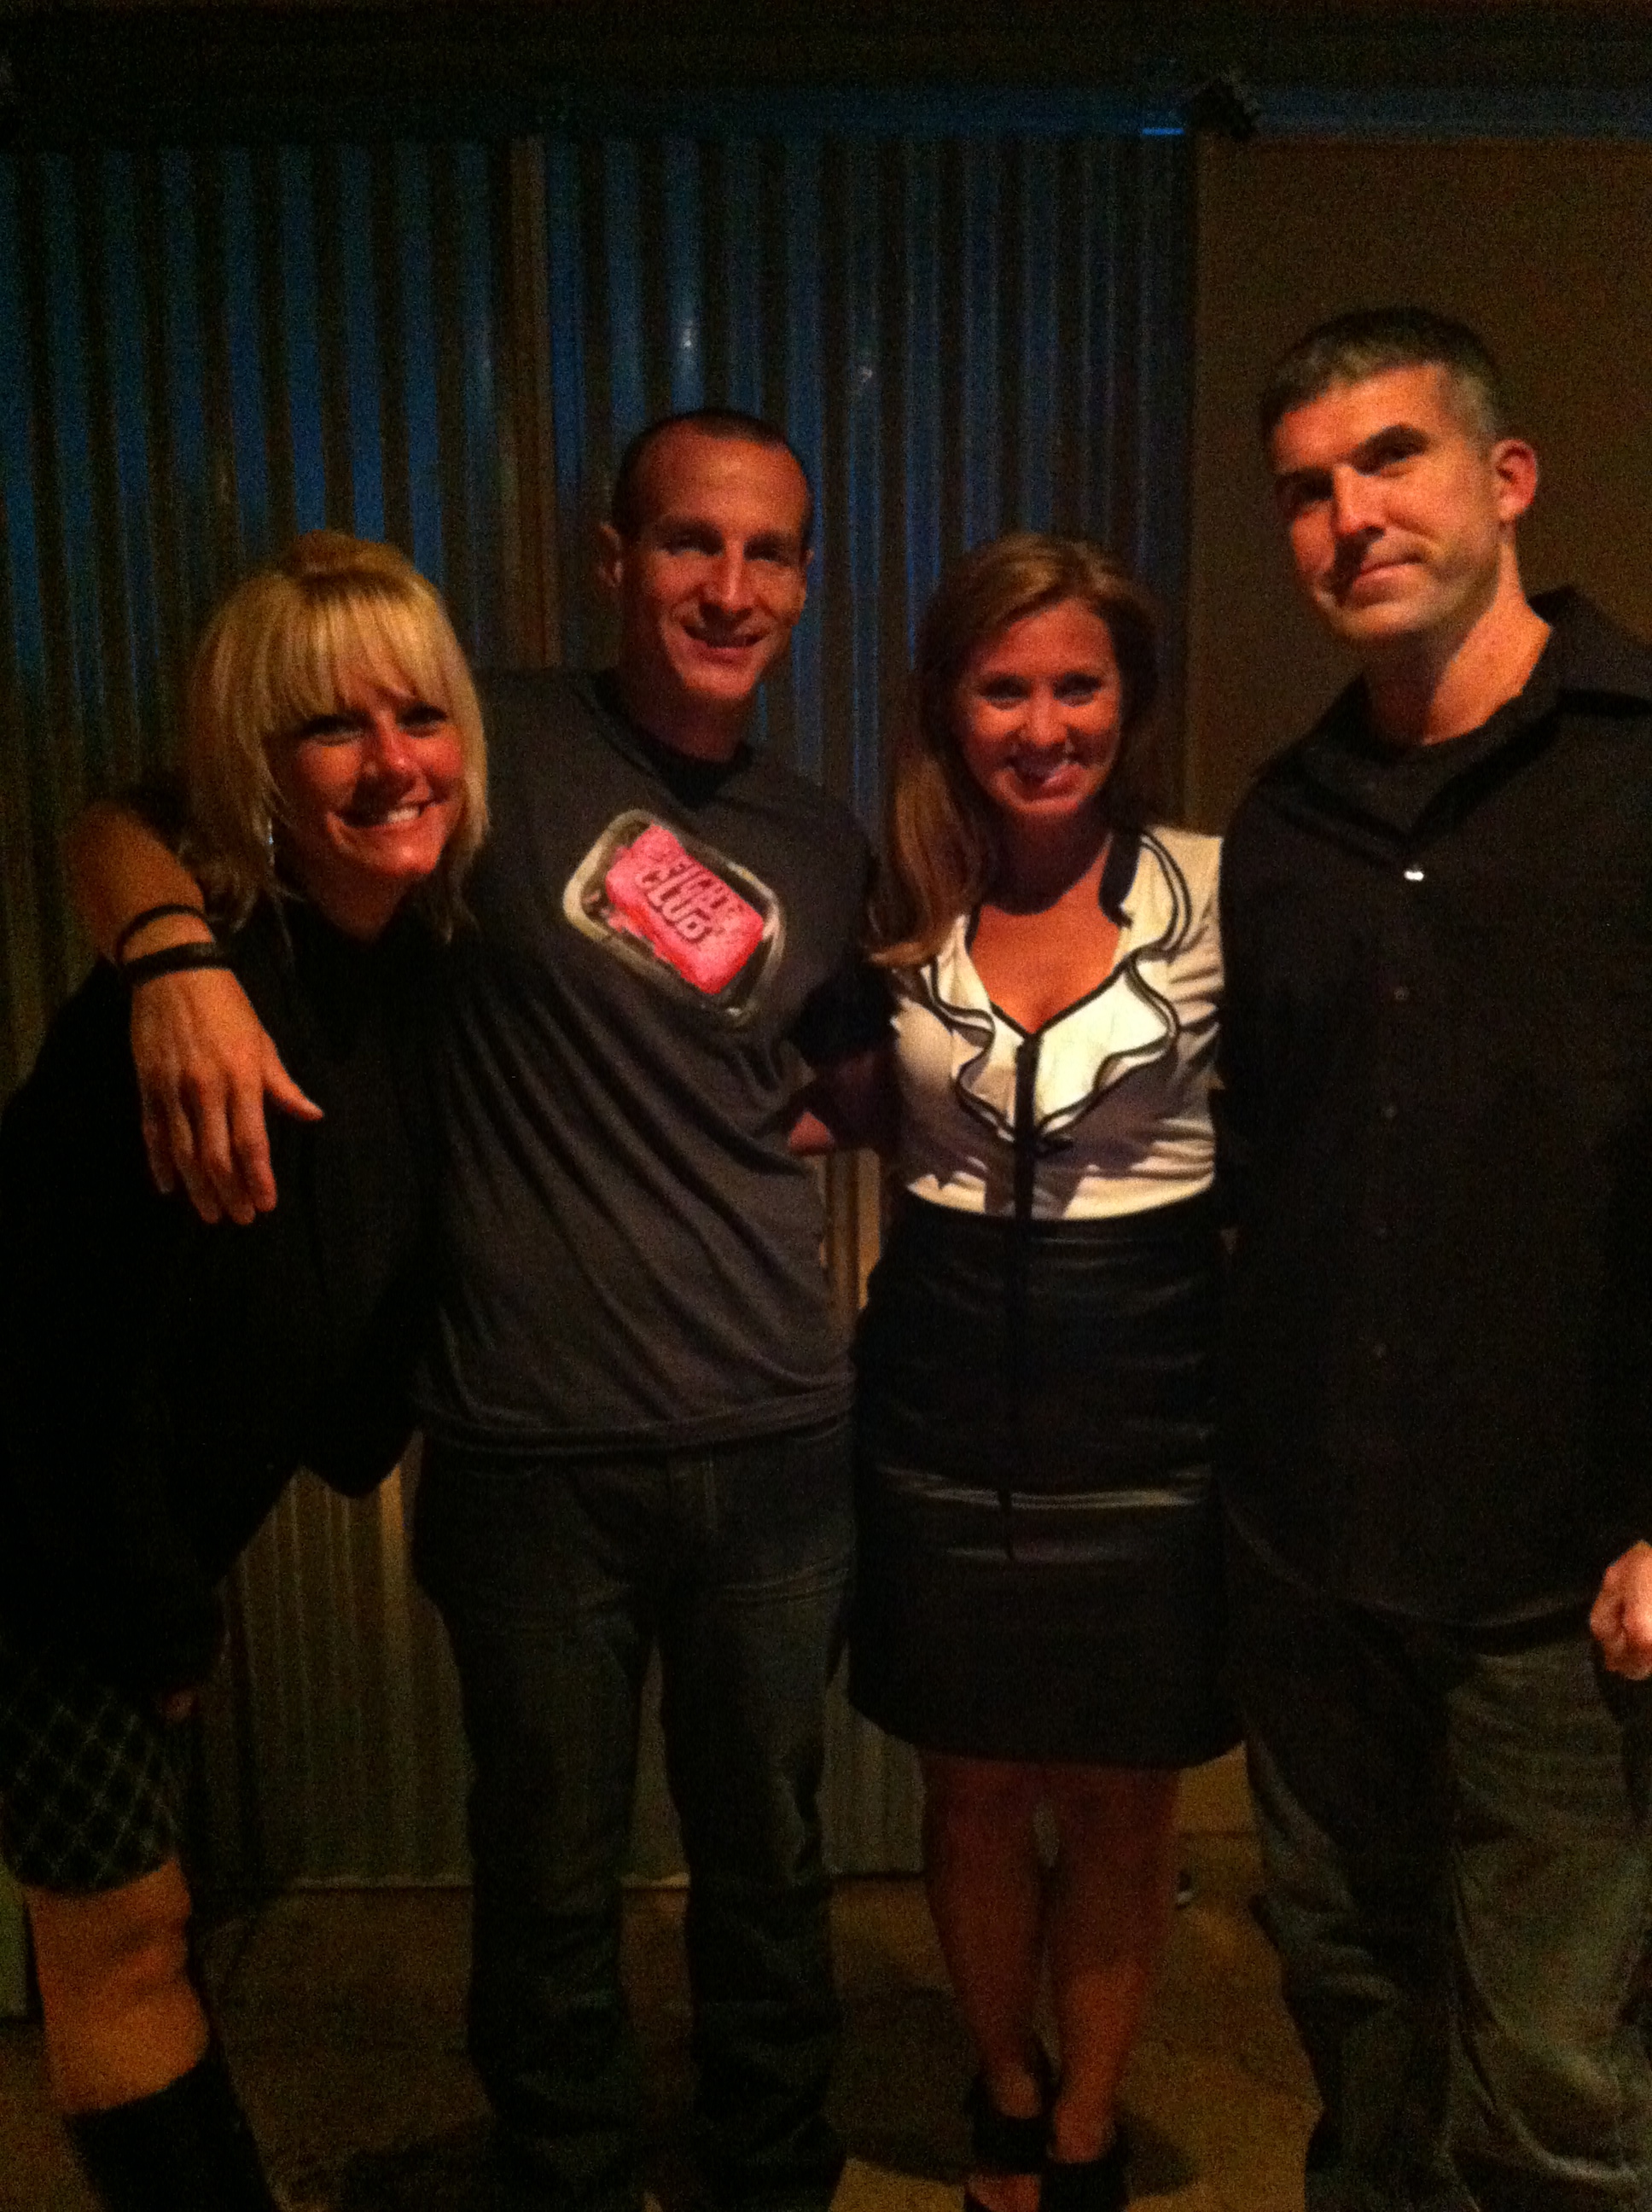 At the premiere of Wasted Lives Chapter II with stars, (L-R) Melany White, Sean Patrowich, Libby Felten and Jeremy Flexer